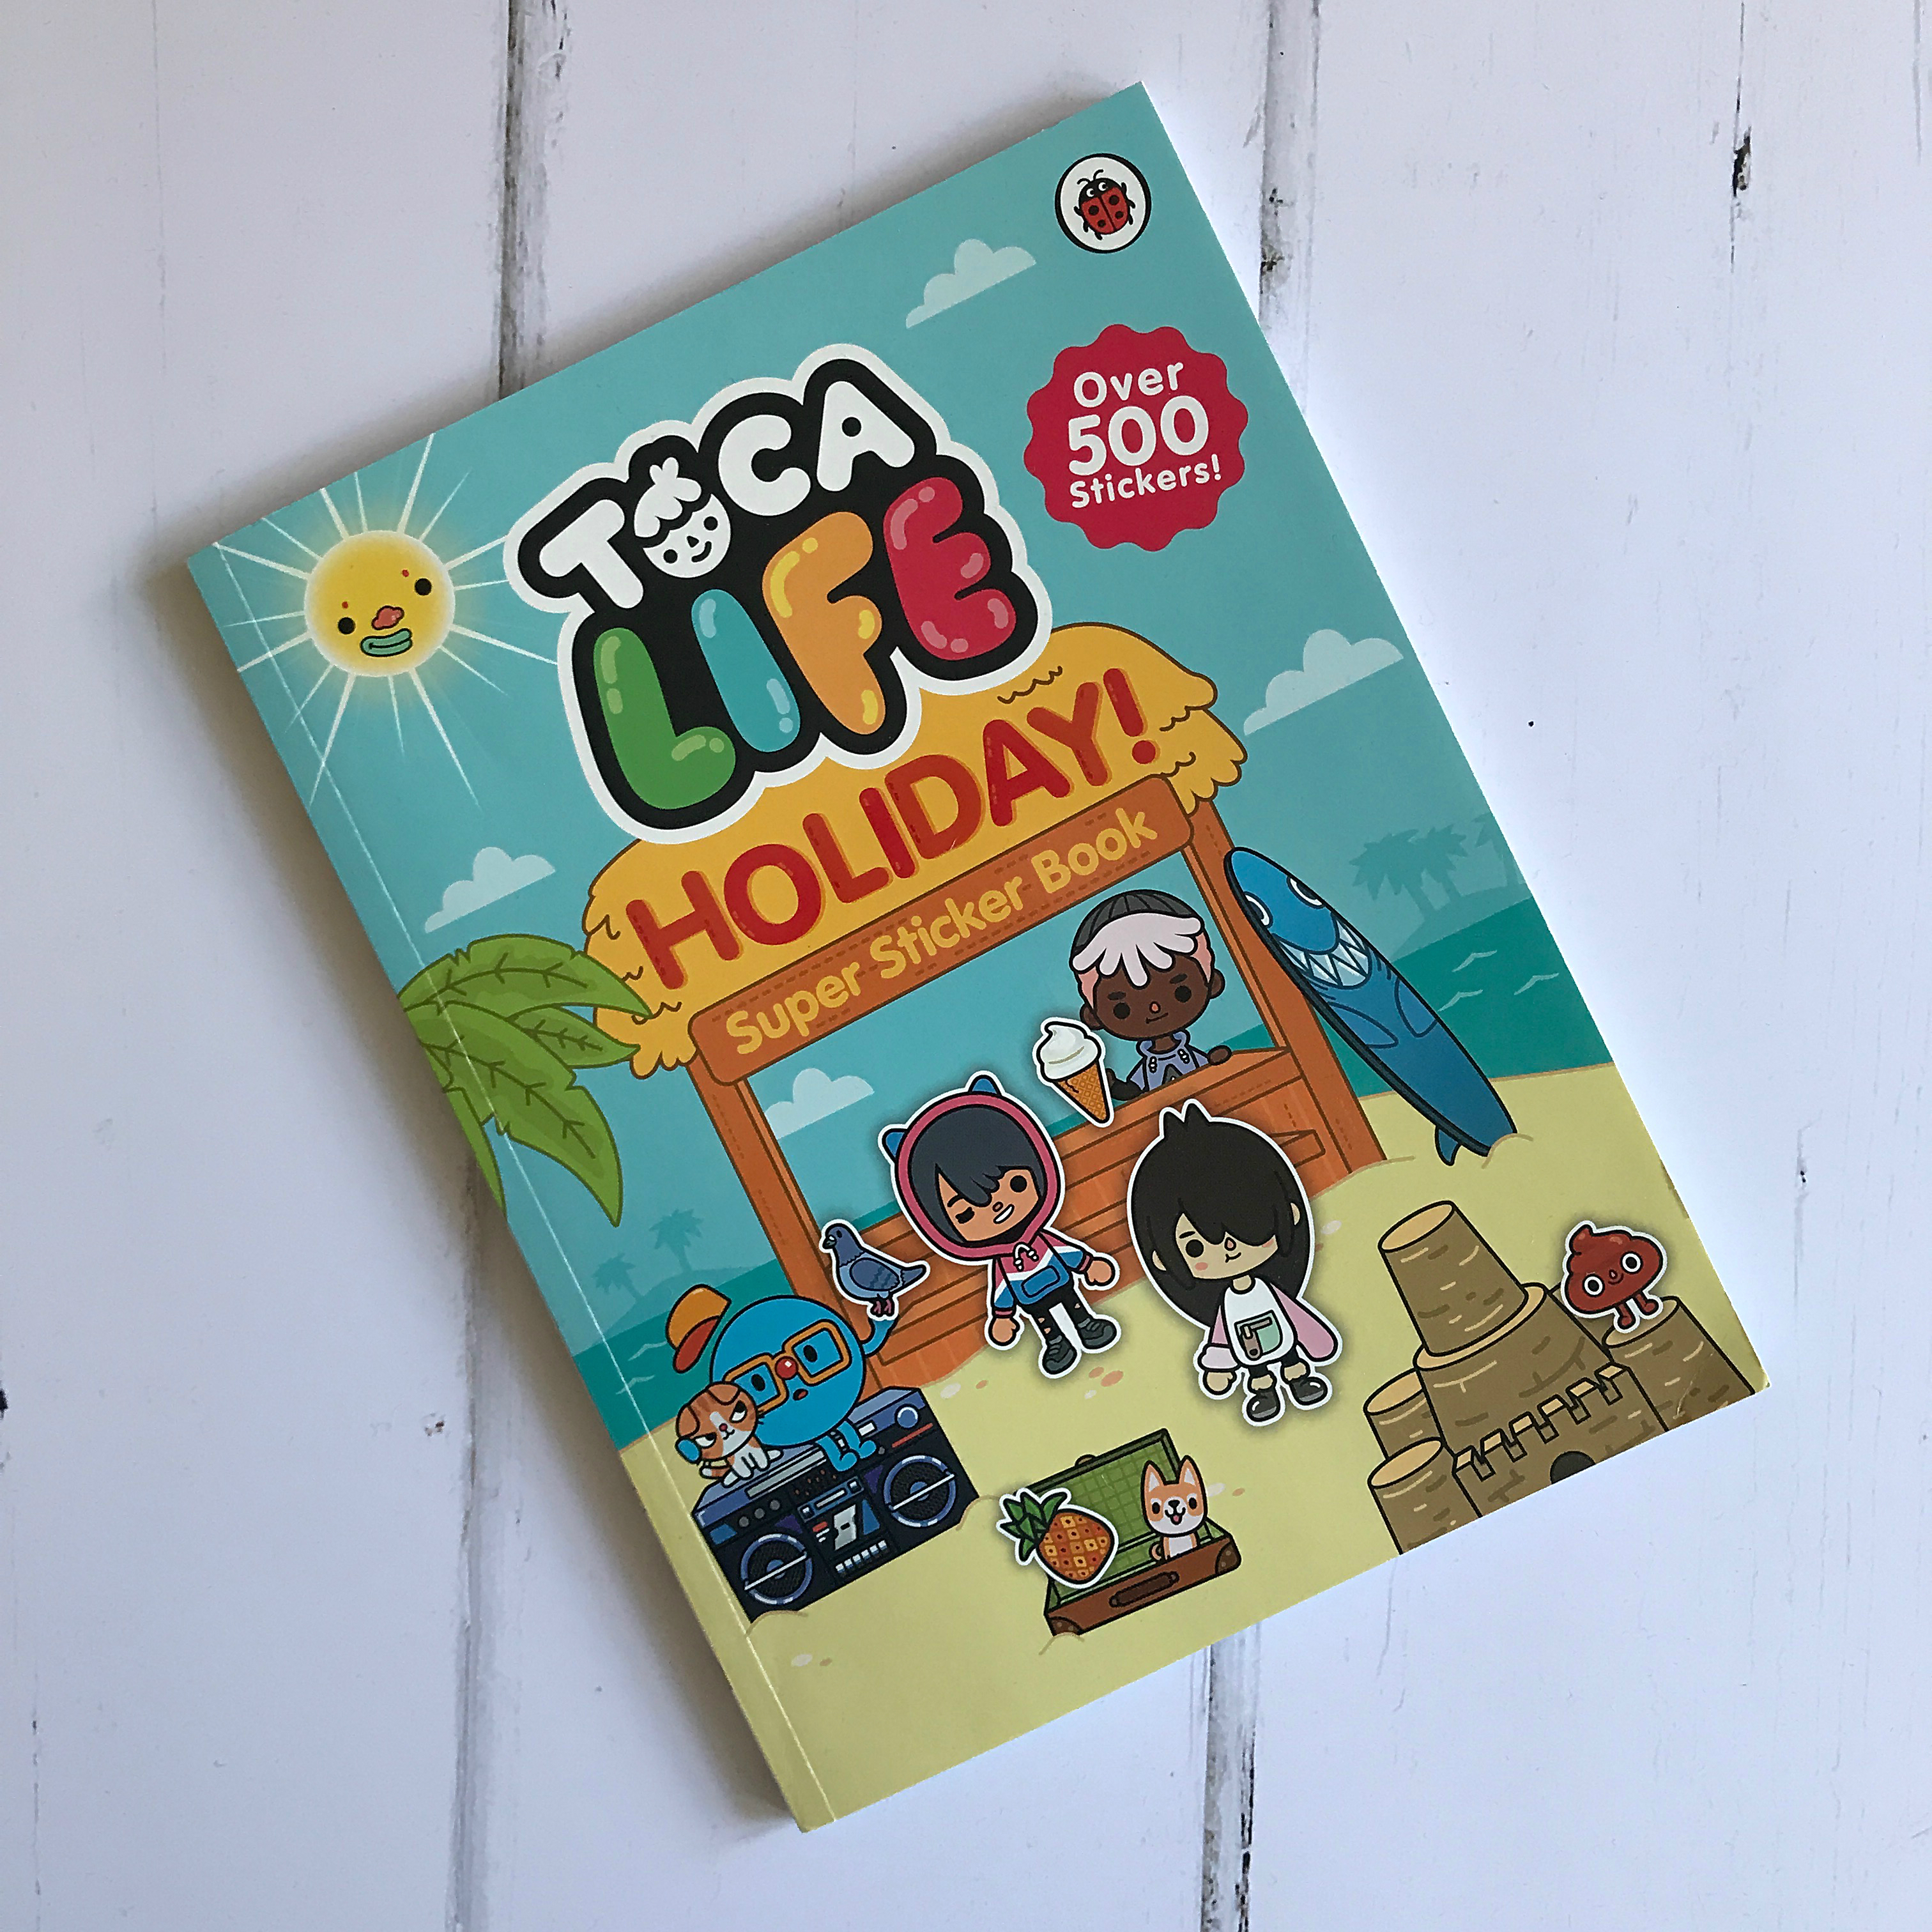 Review: Toca Life Holiday! Sticker Book [AD] – The Bear & The Fox